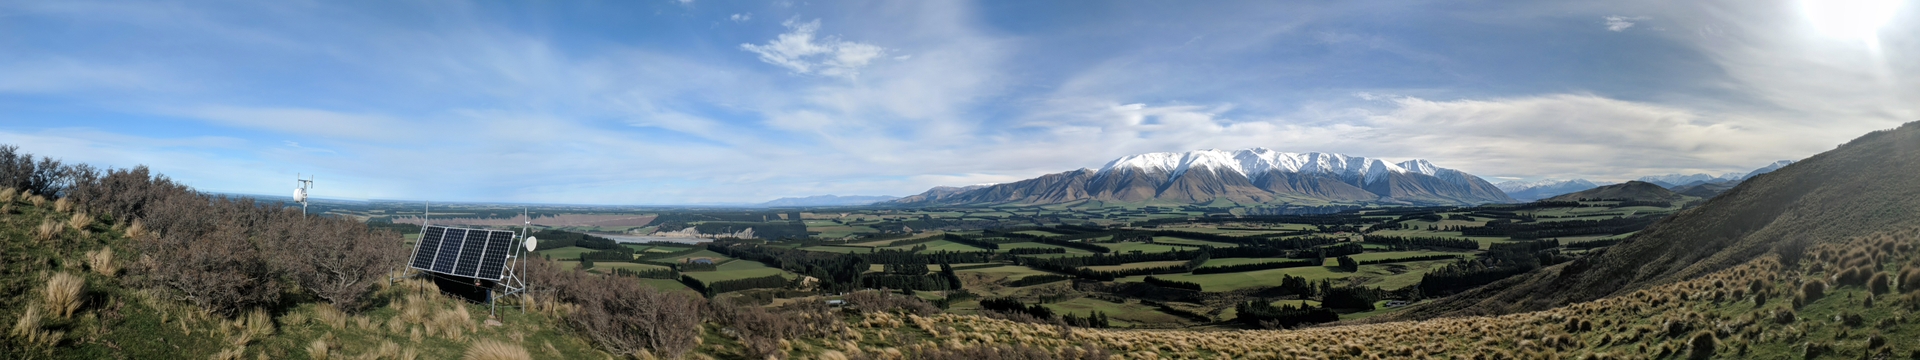 mountains in new zealand